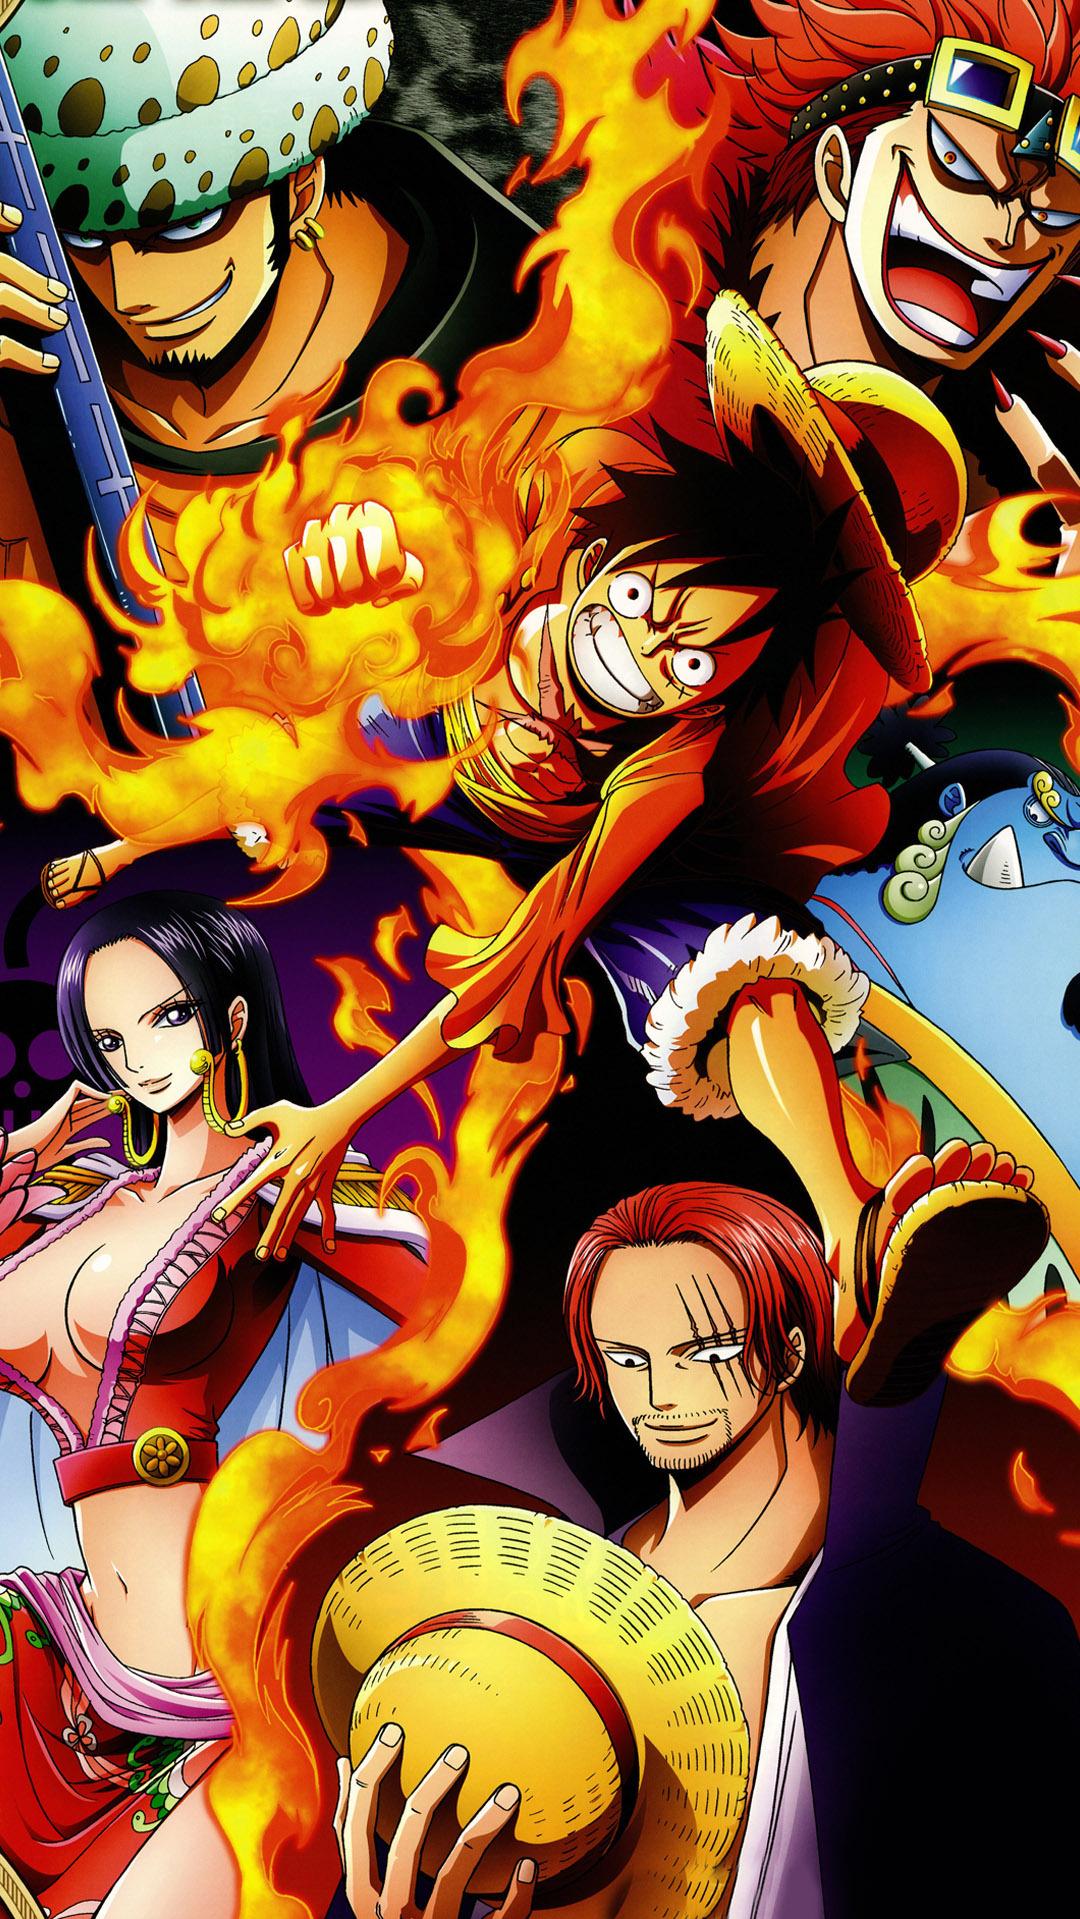 One Piece Wallpapers - Top 45 Best One Piece Backgrounds Download